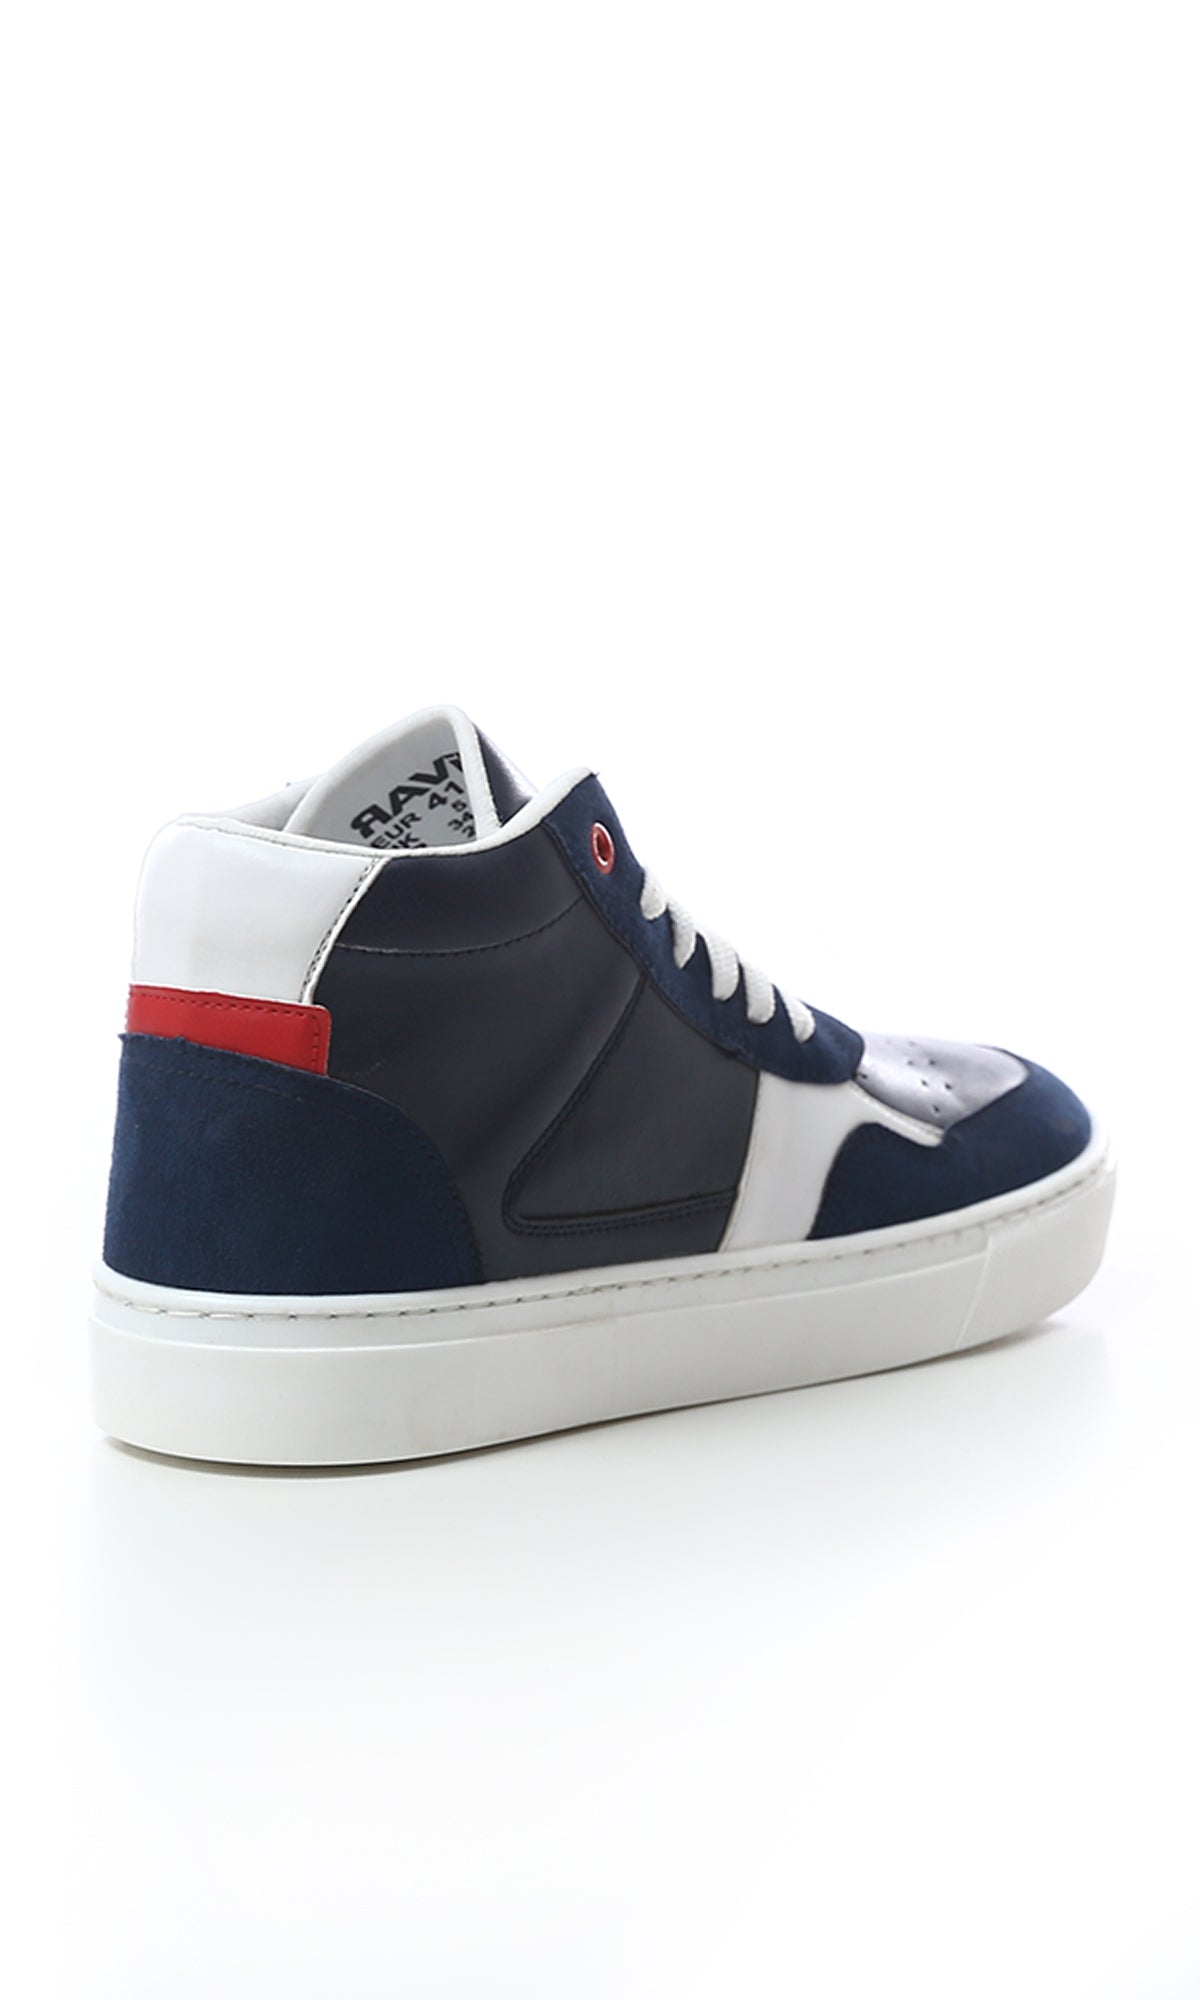 O180407 Lace Up Leather With Suede High-Neck Casual Shoes - Navy Blue